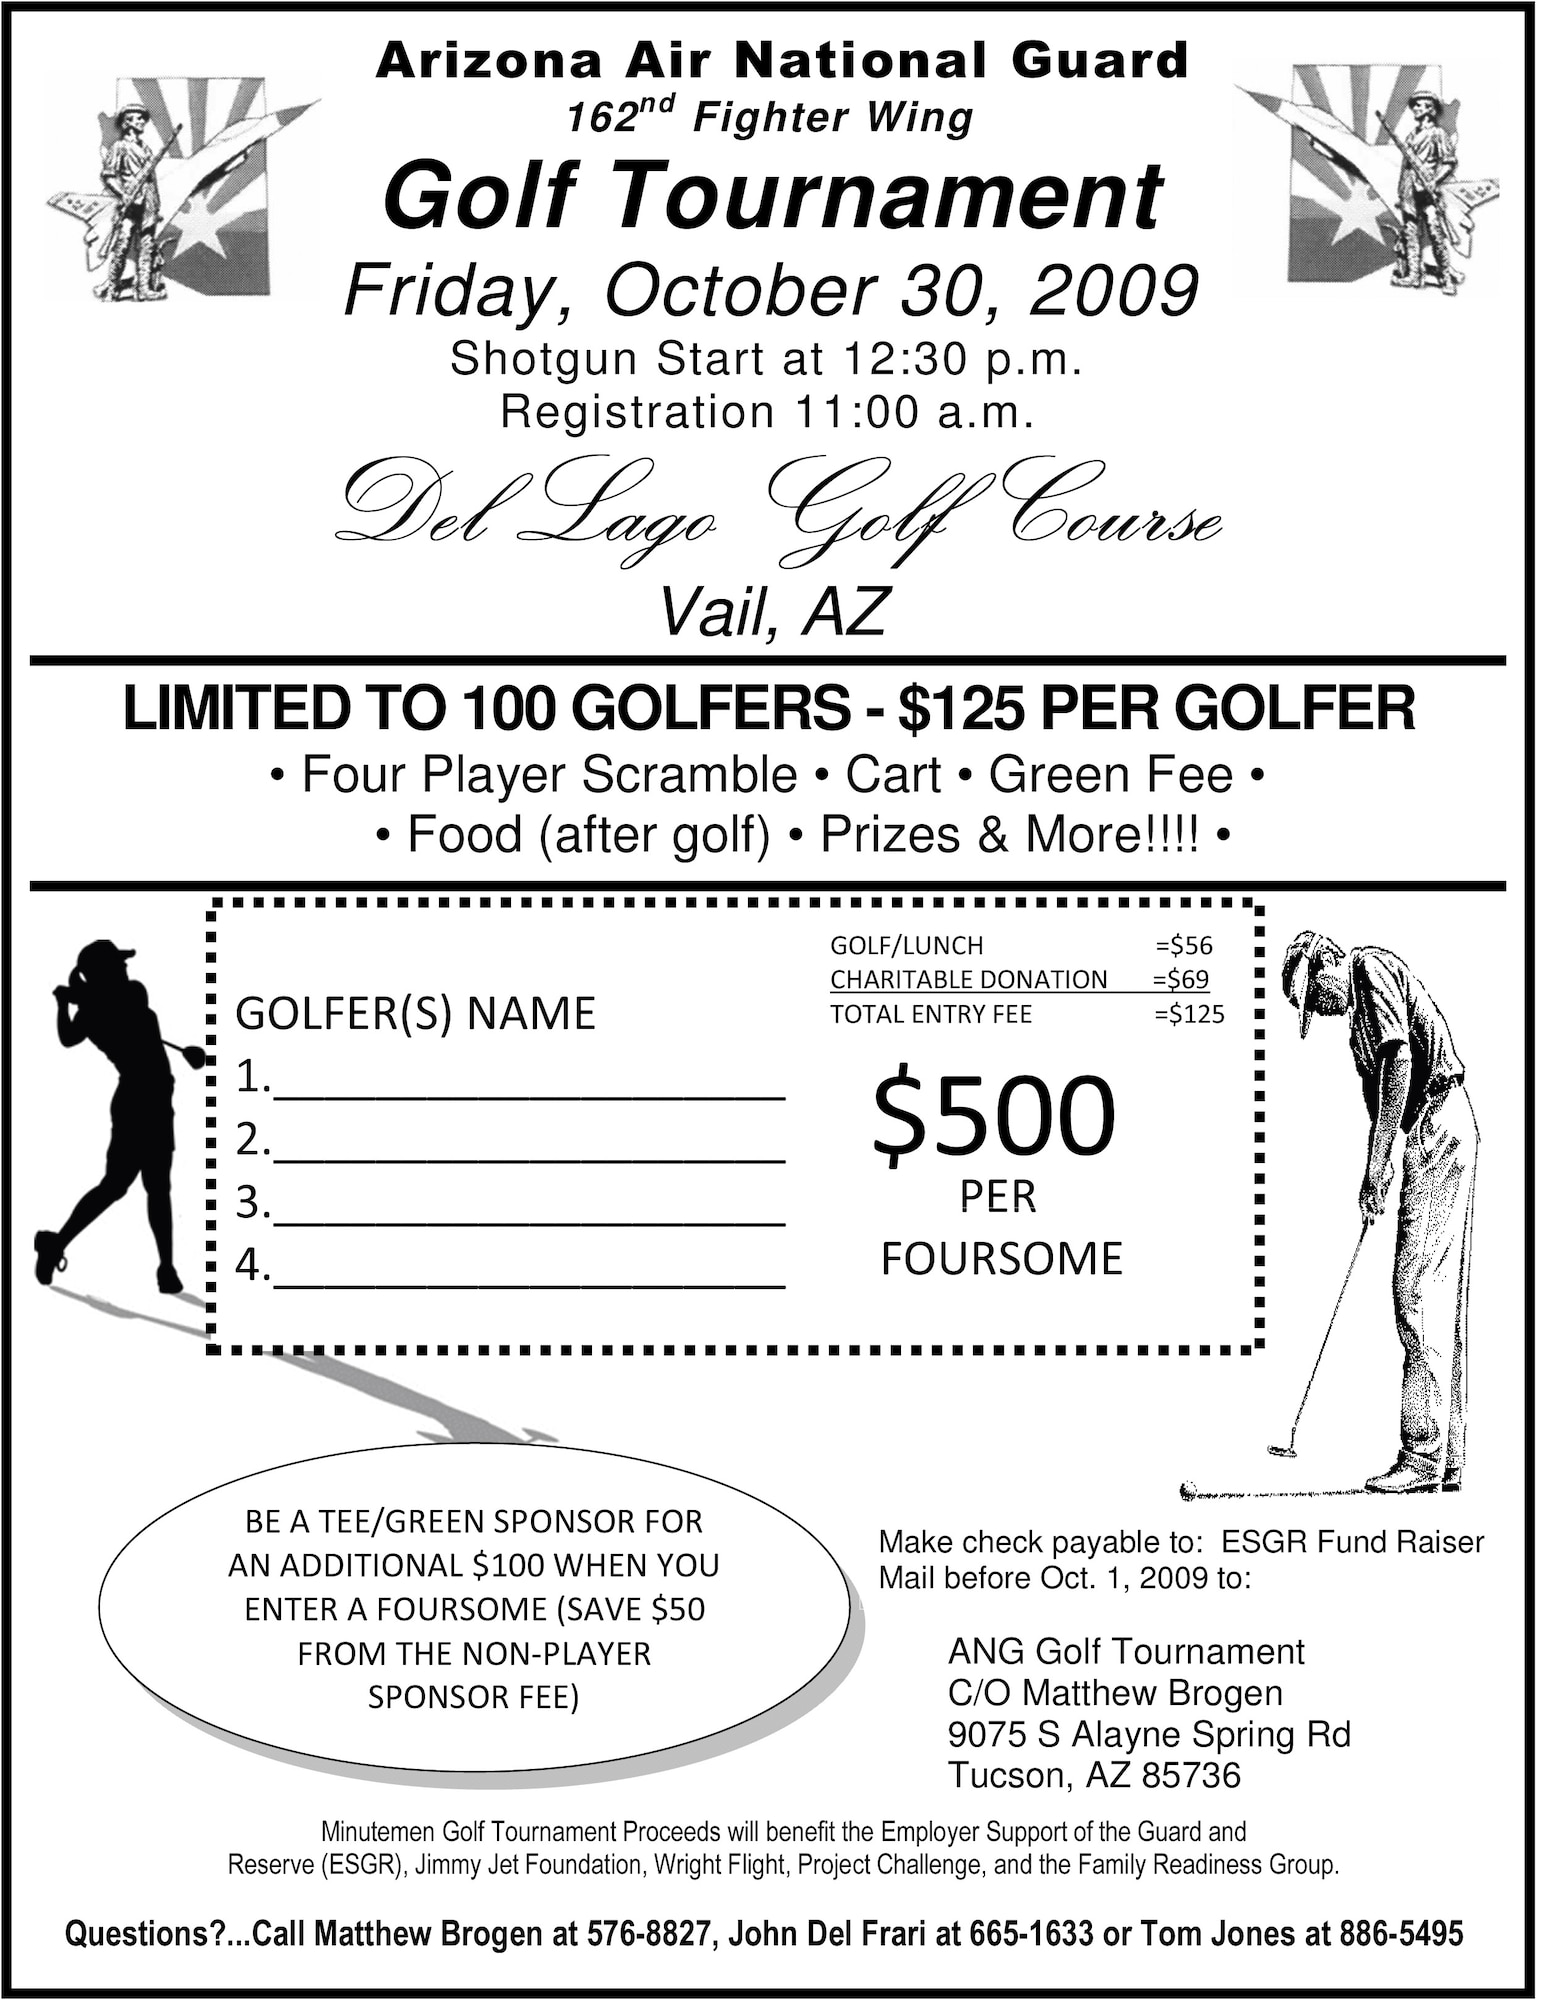 Sign up for the 2009 162nd Fighter Wing Minuteman Committee Golf Tournament.